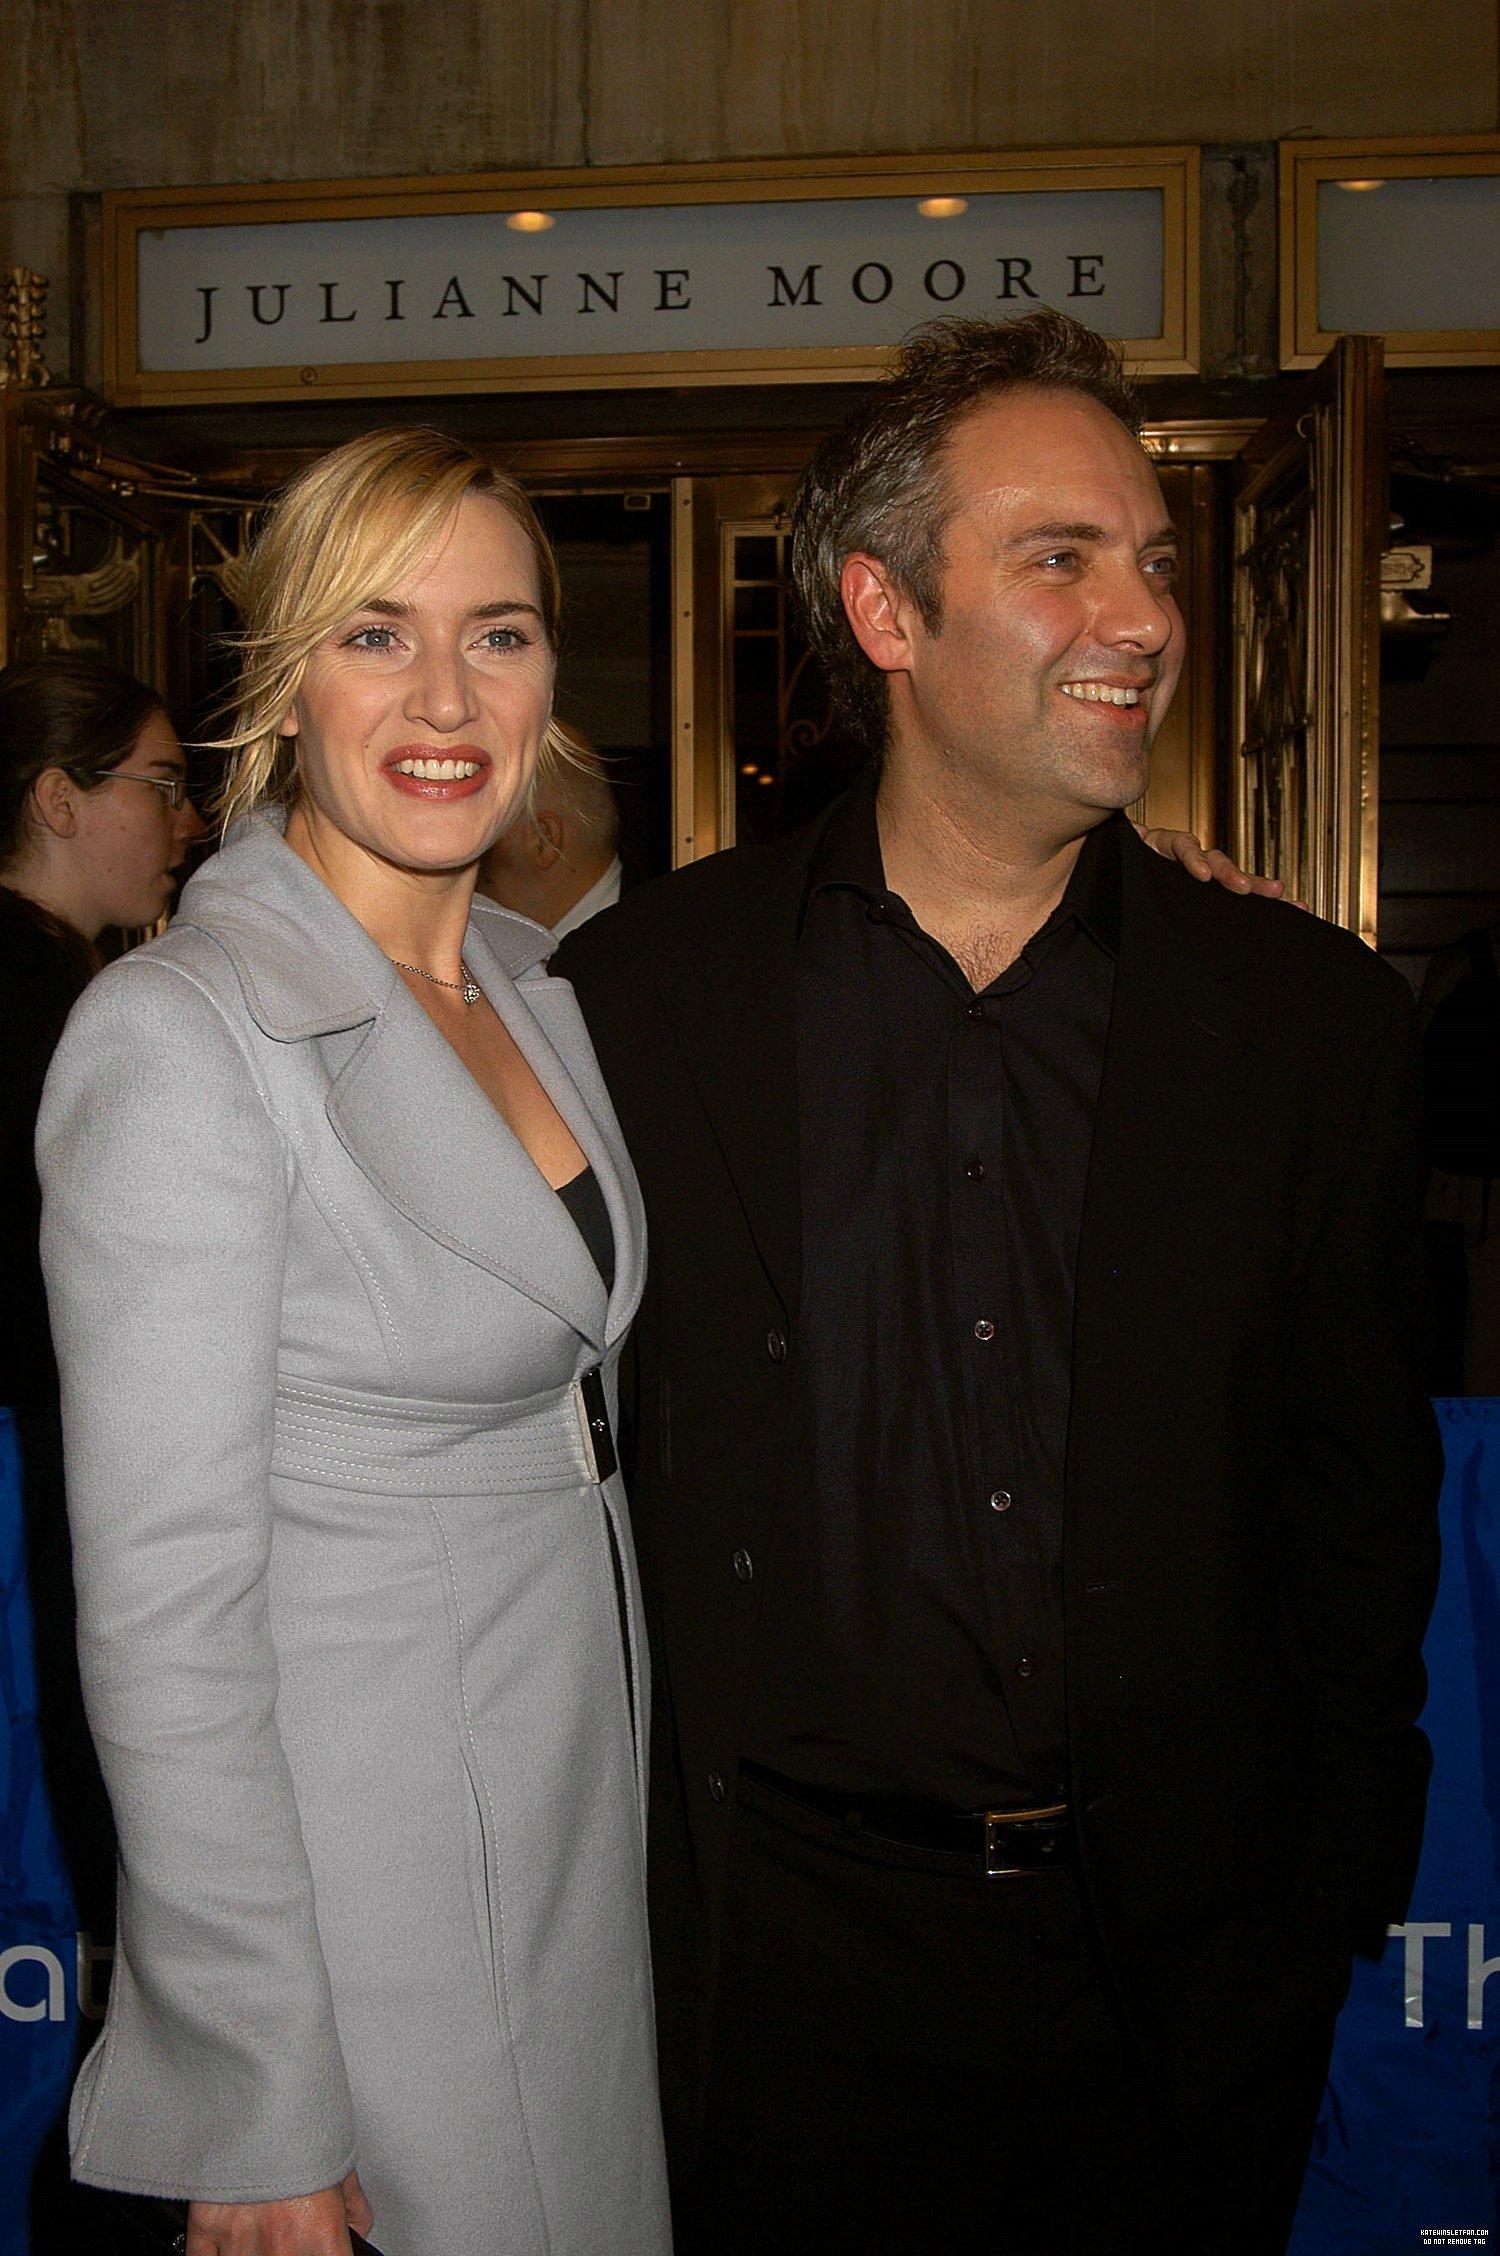 opening-night-of-the-vertical-hour-on-broadway_130.jpg